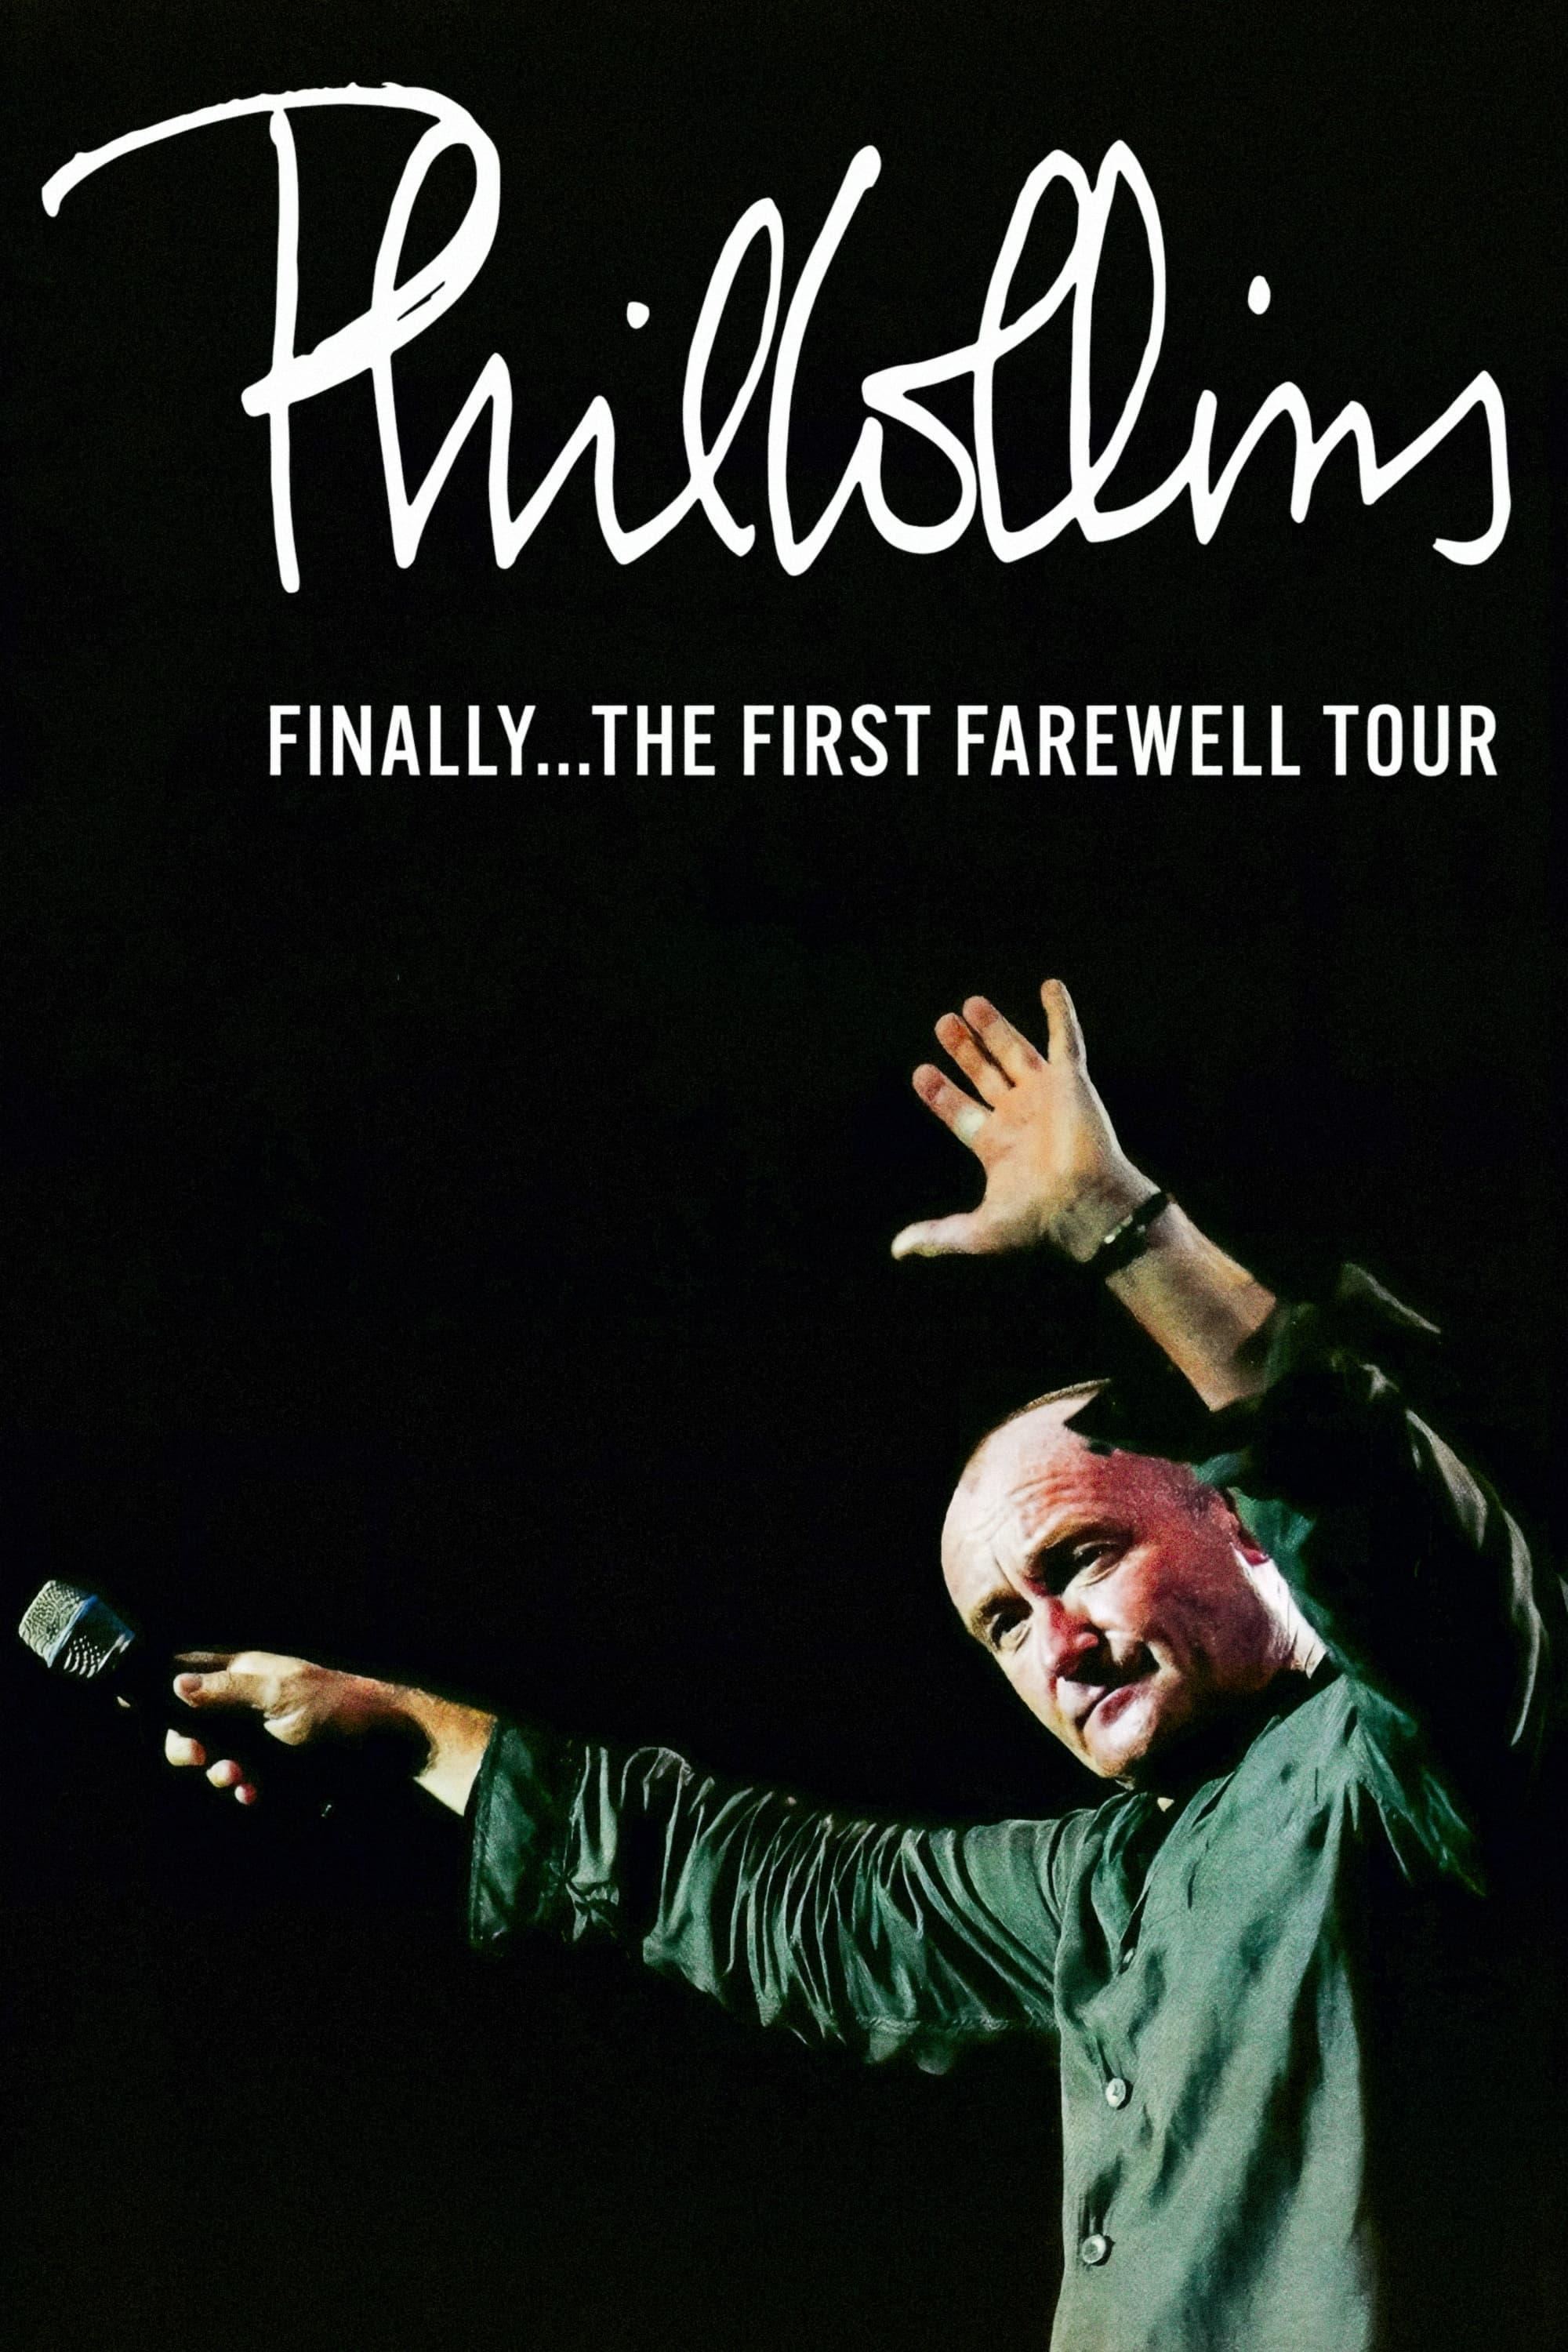 Phil Collins: Finally… The First Farewell Tour poster